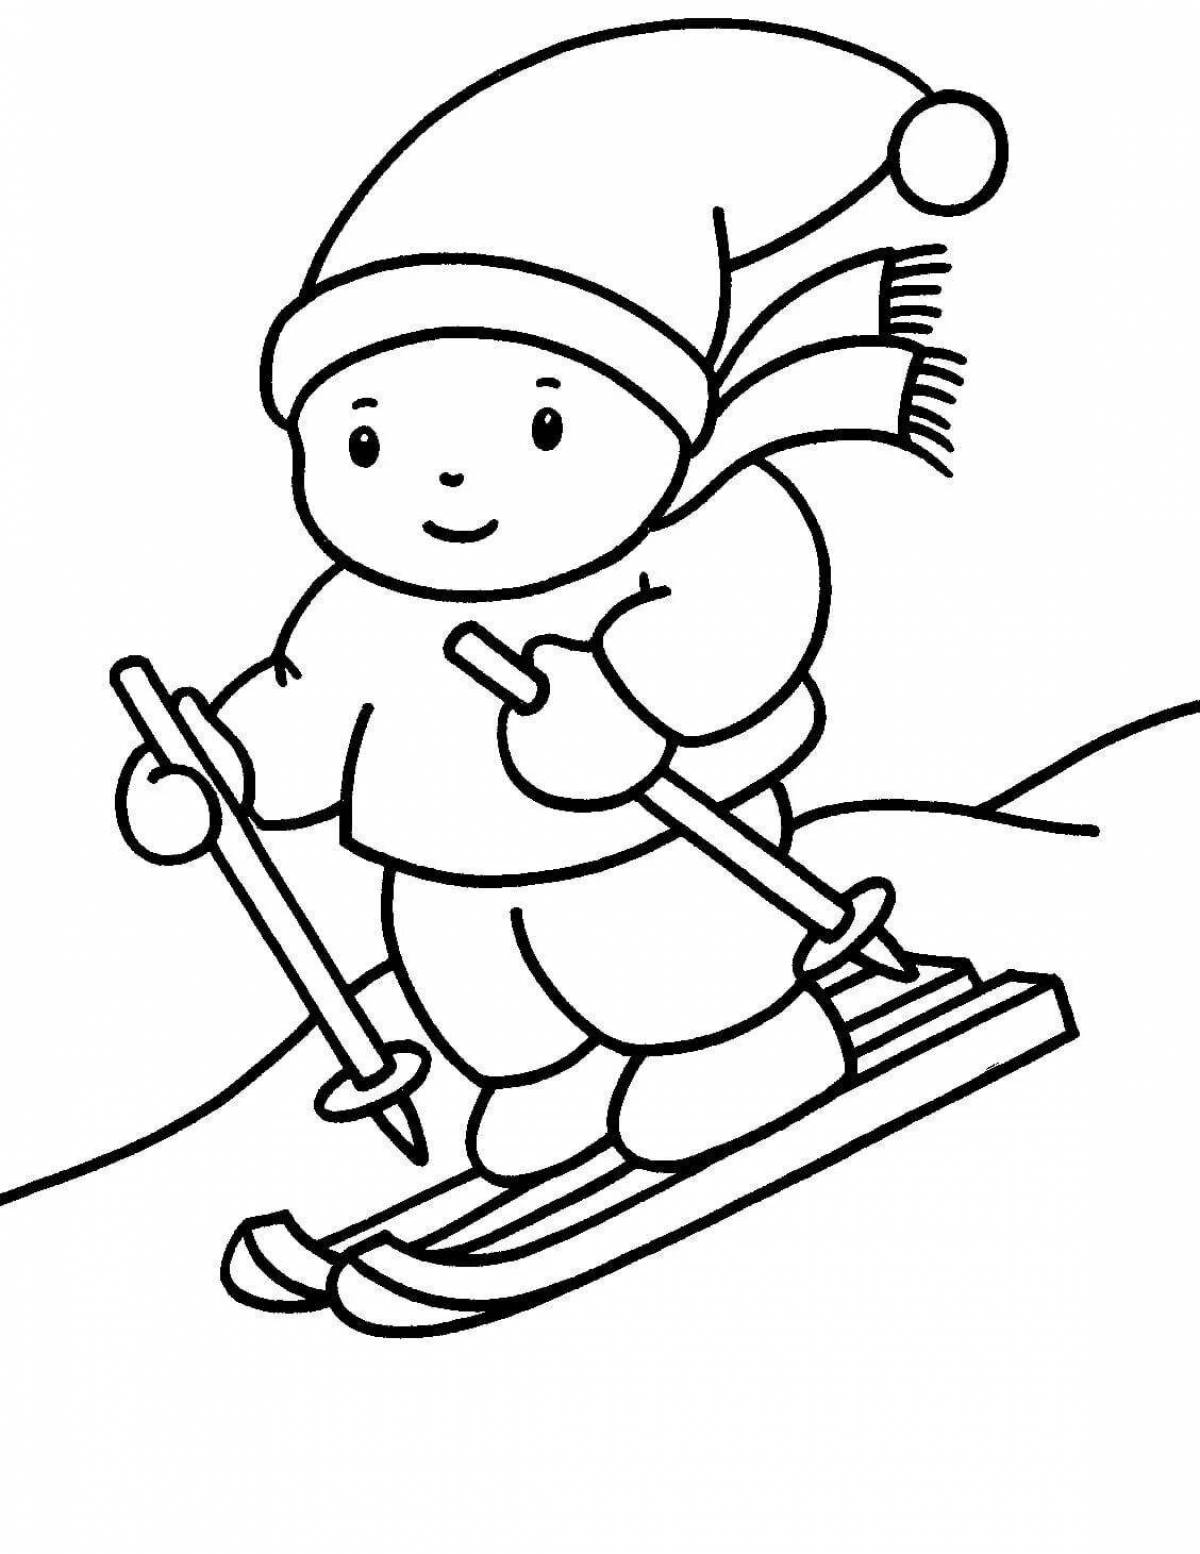 Coloring book playful baby skier